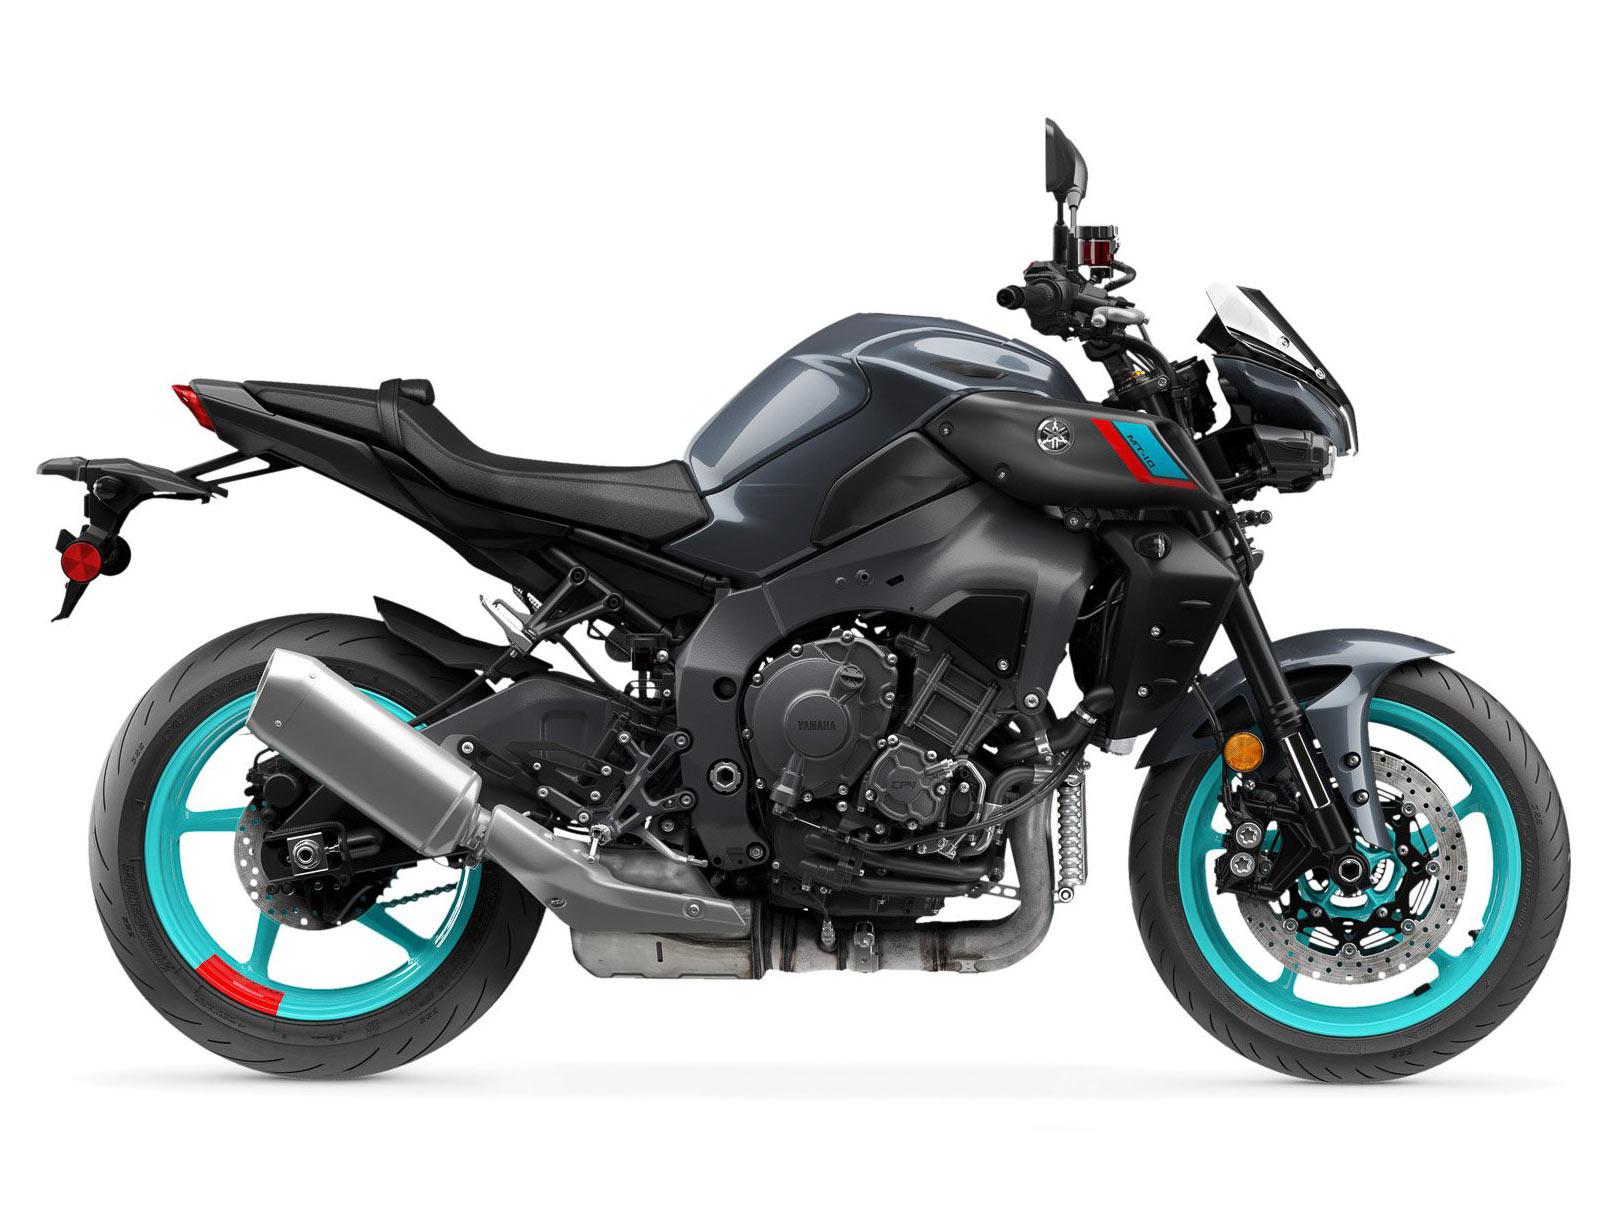 2022 Yamaha MT-10 Buyer's Guide: Specs, Photos, Price | Cycle World